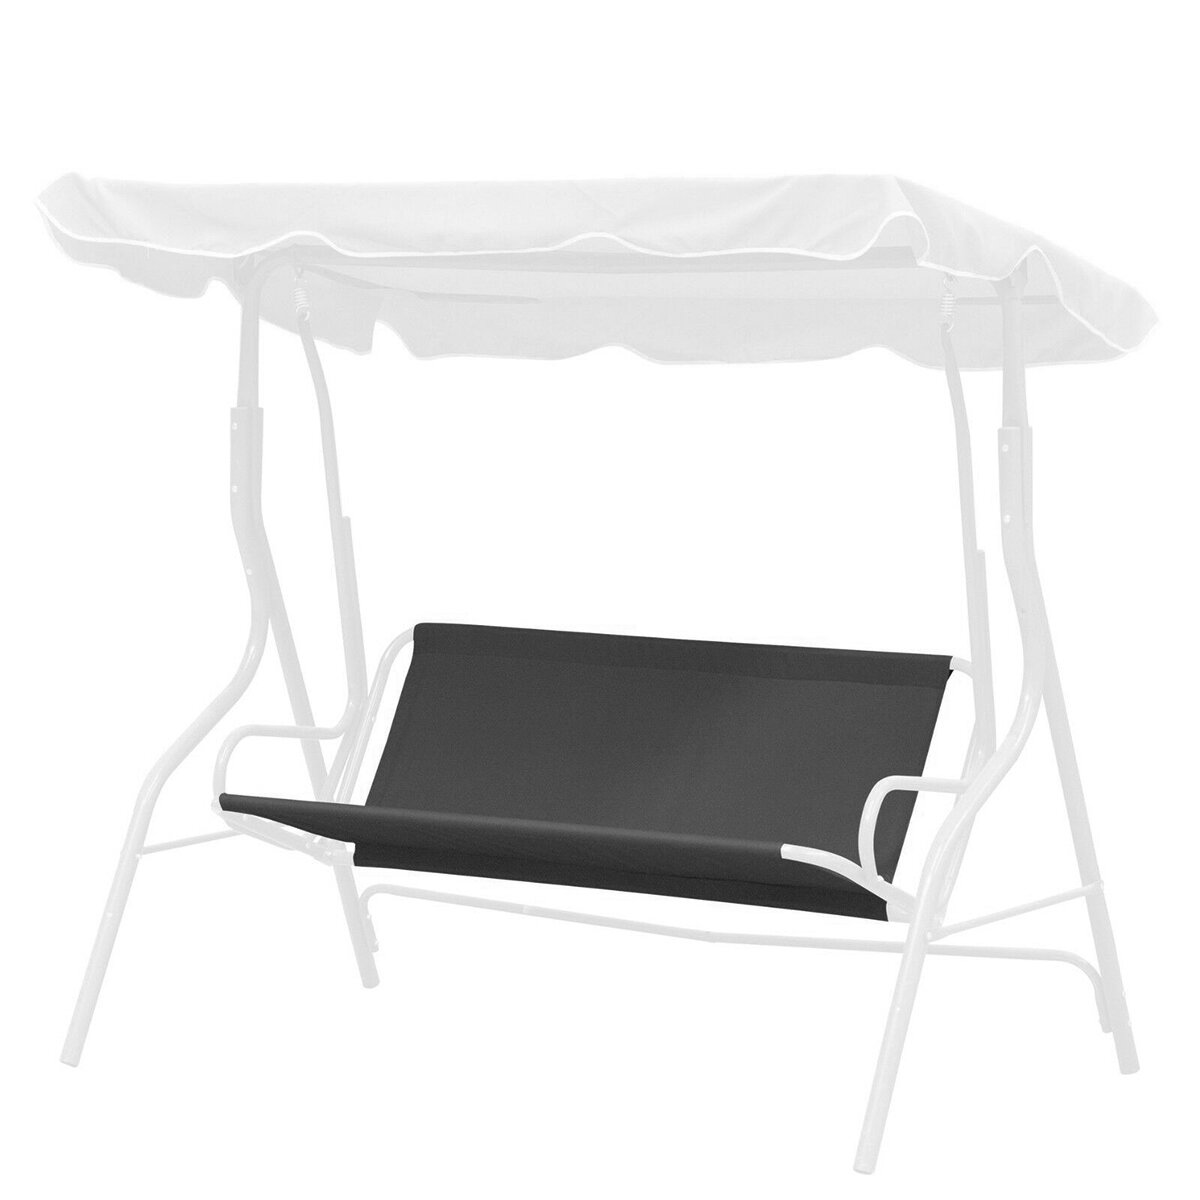 Polyester 3 People Swing Seat Cover Waterproof UV-proof Replacement Chair Cushion Patio Garden